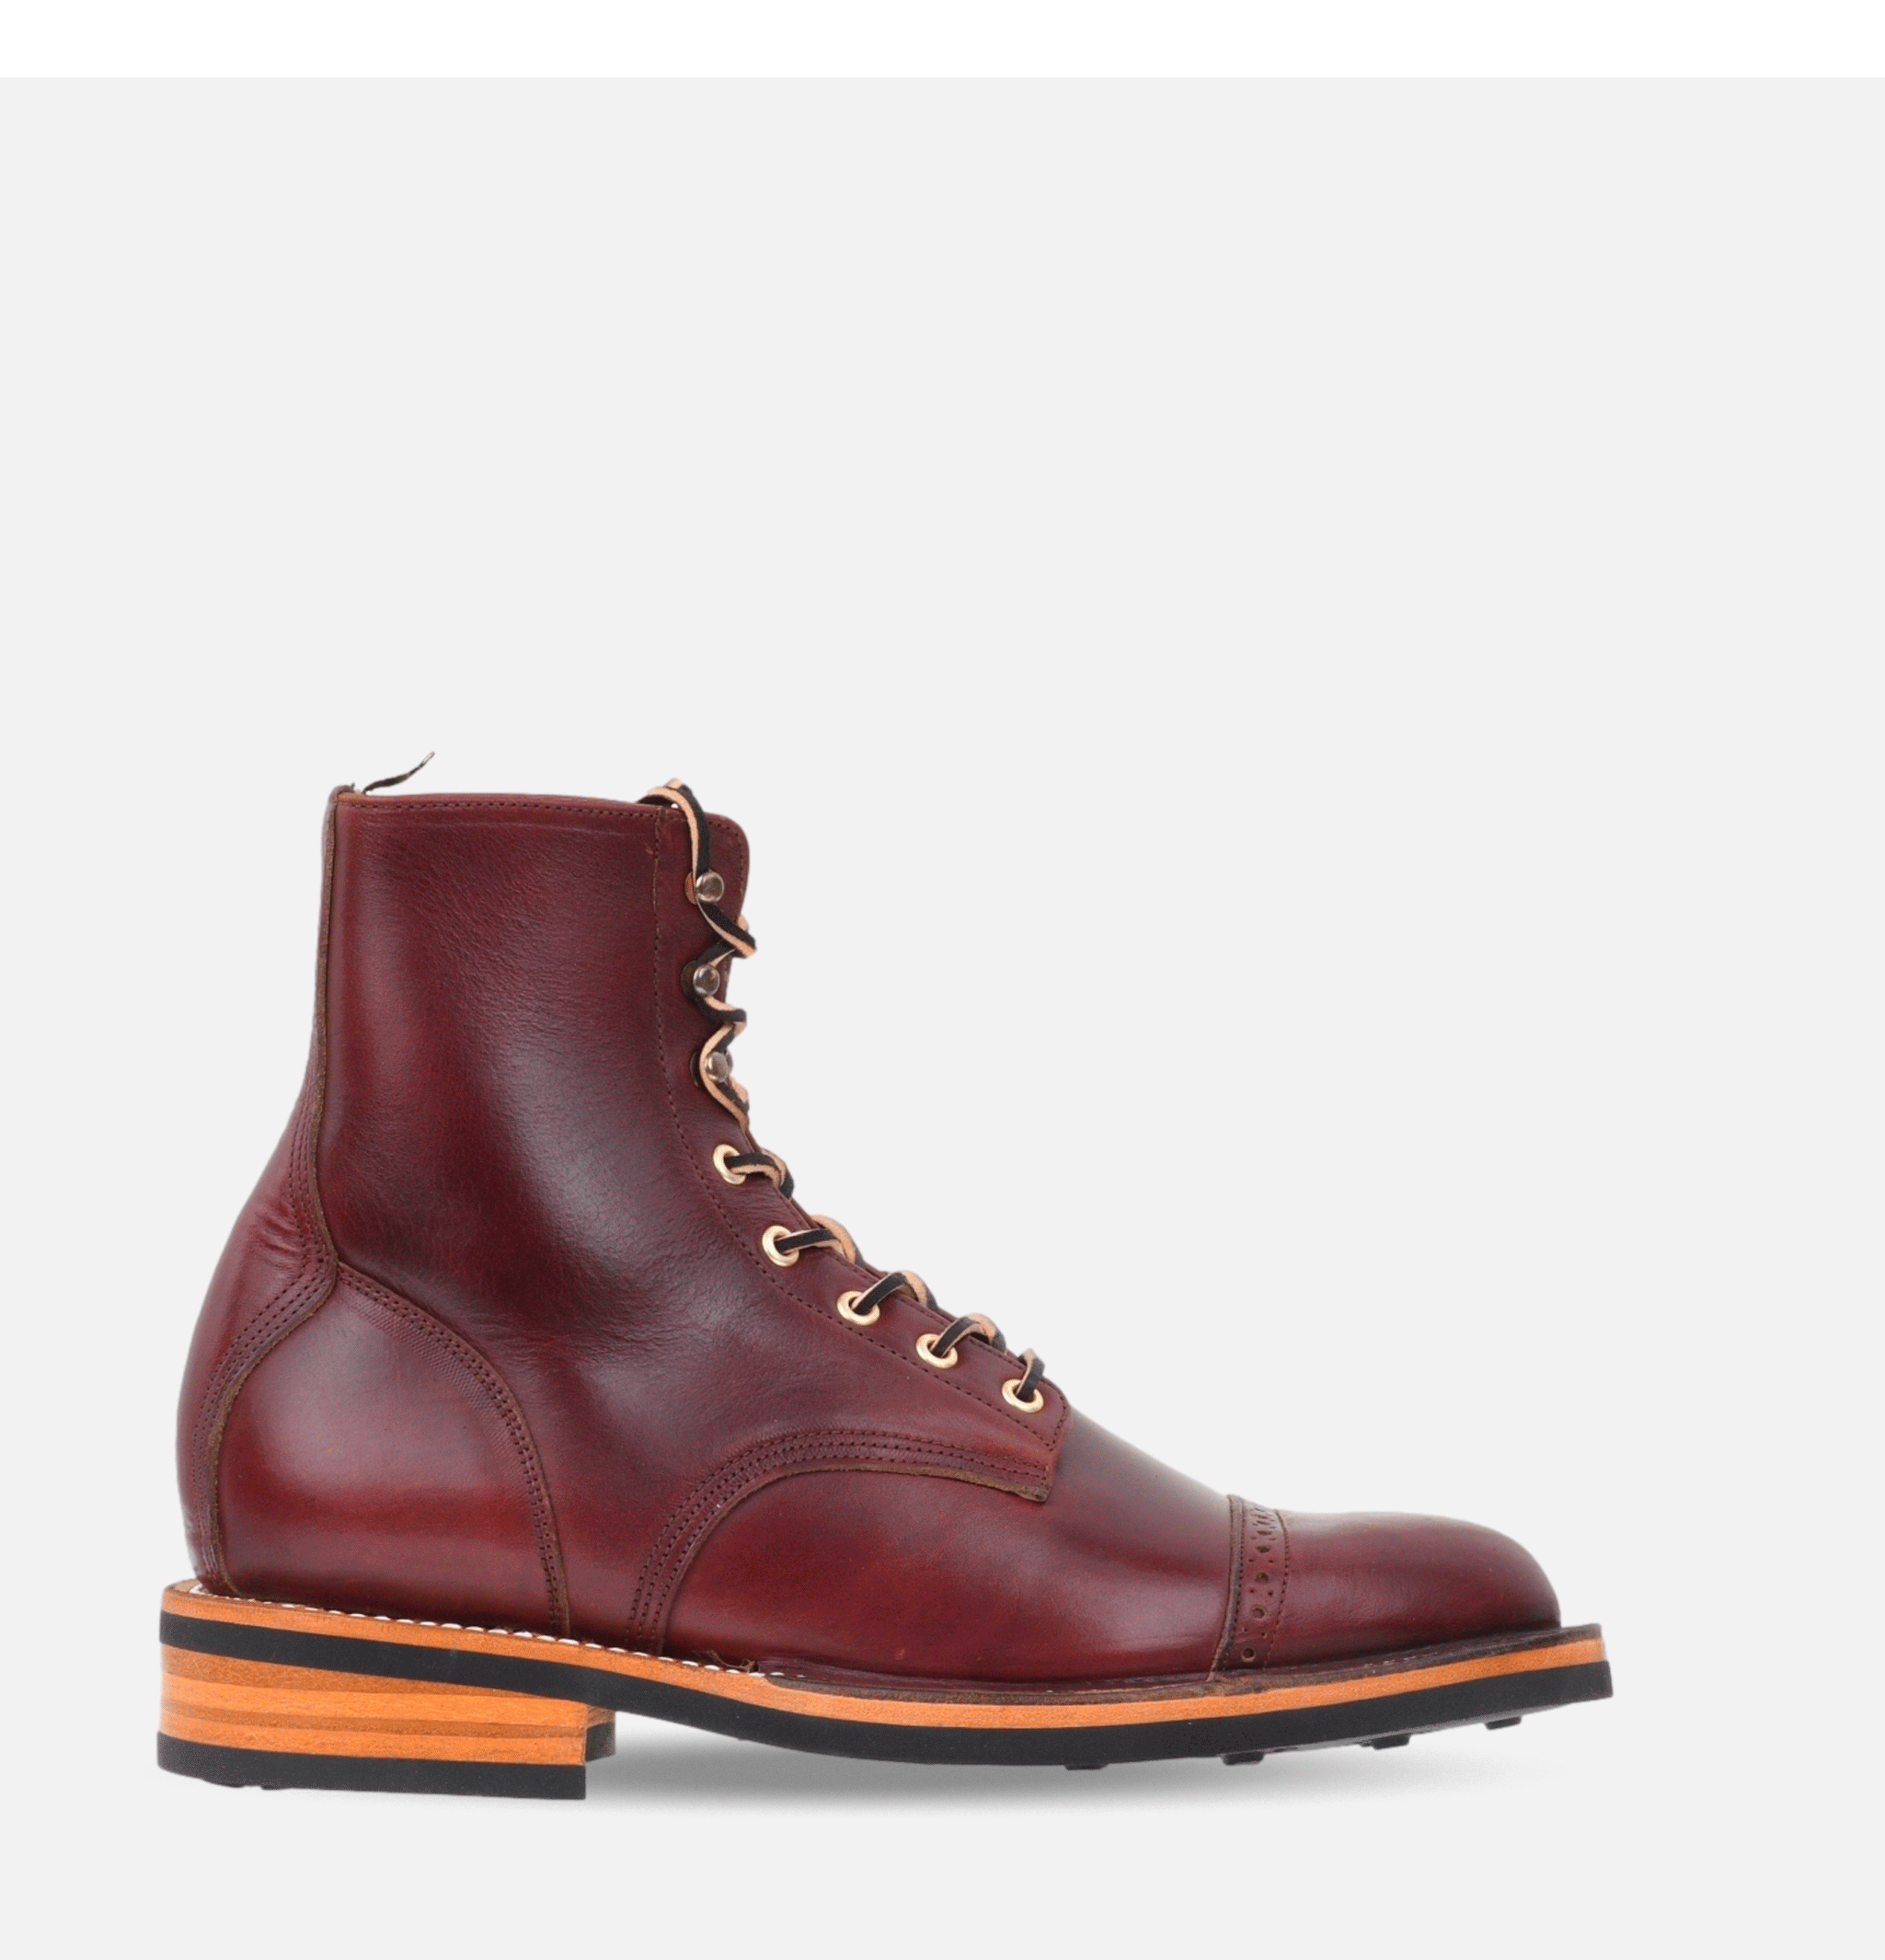 Unmarked Cap Toe Boots Brown